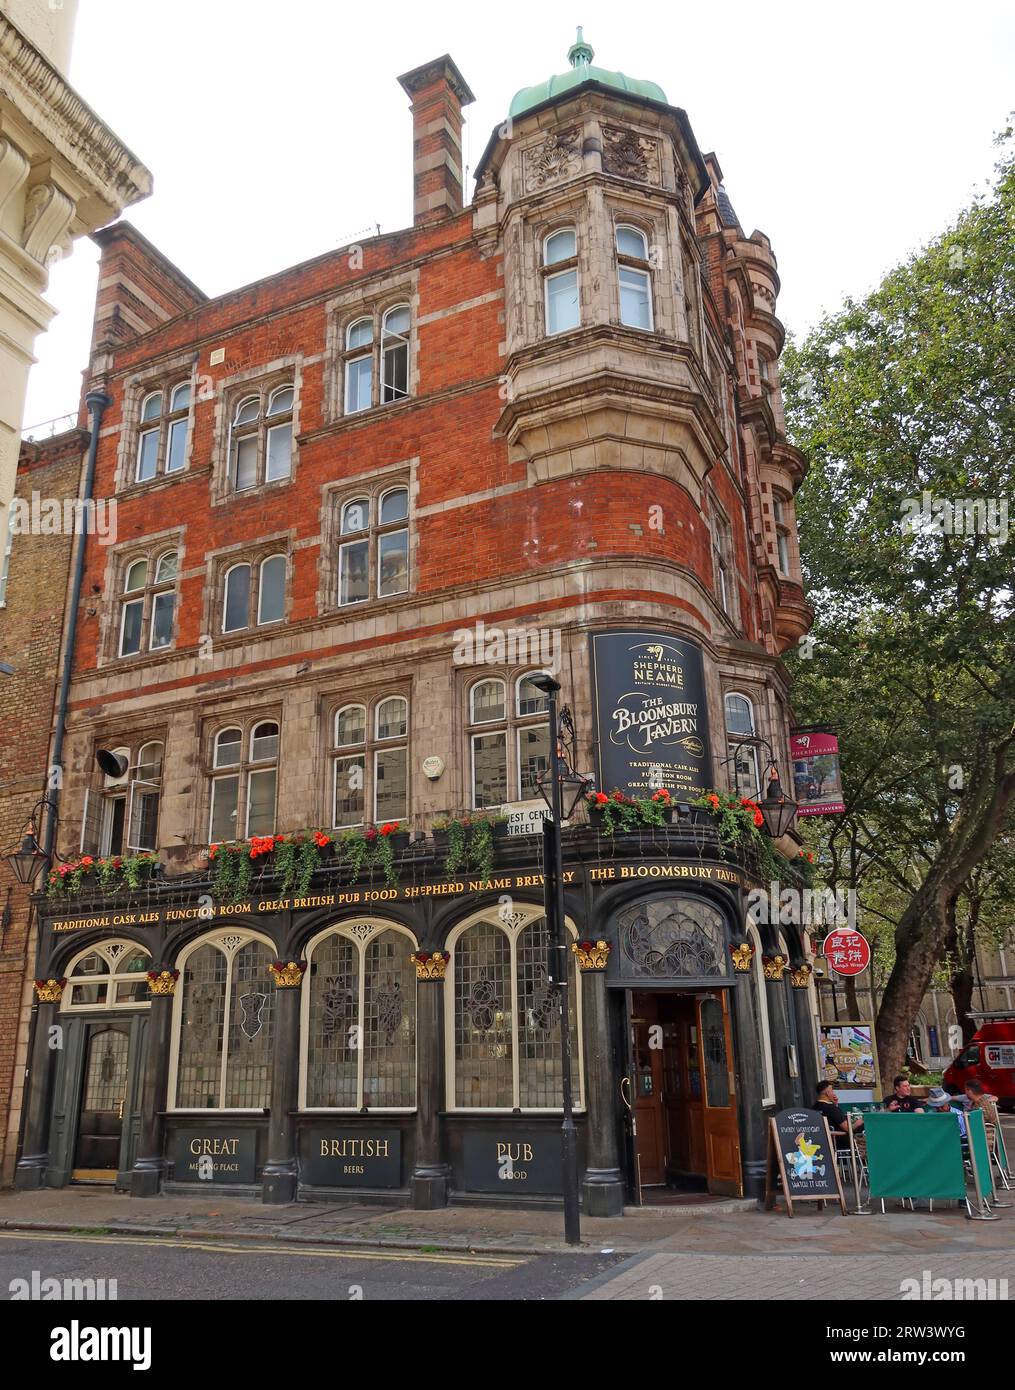 The Bloomsbury Tavern from 1856, 236 Shaftesbury Ave, Londres, Angleterre, Royaume-Uni, WC2H 8EG Banque D'Images